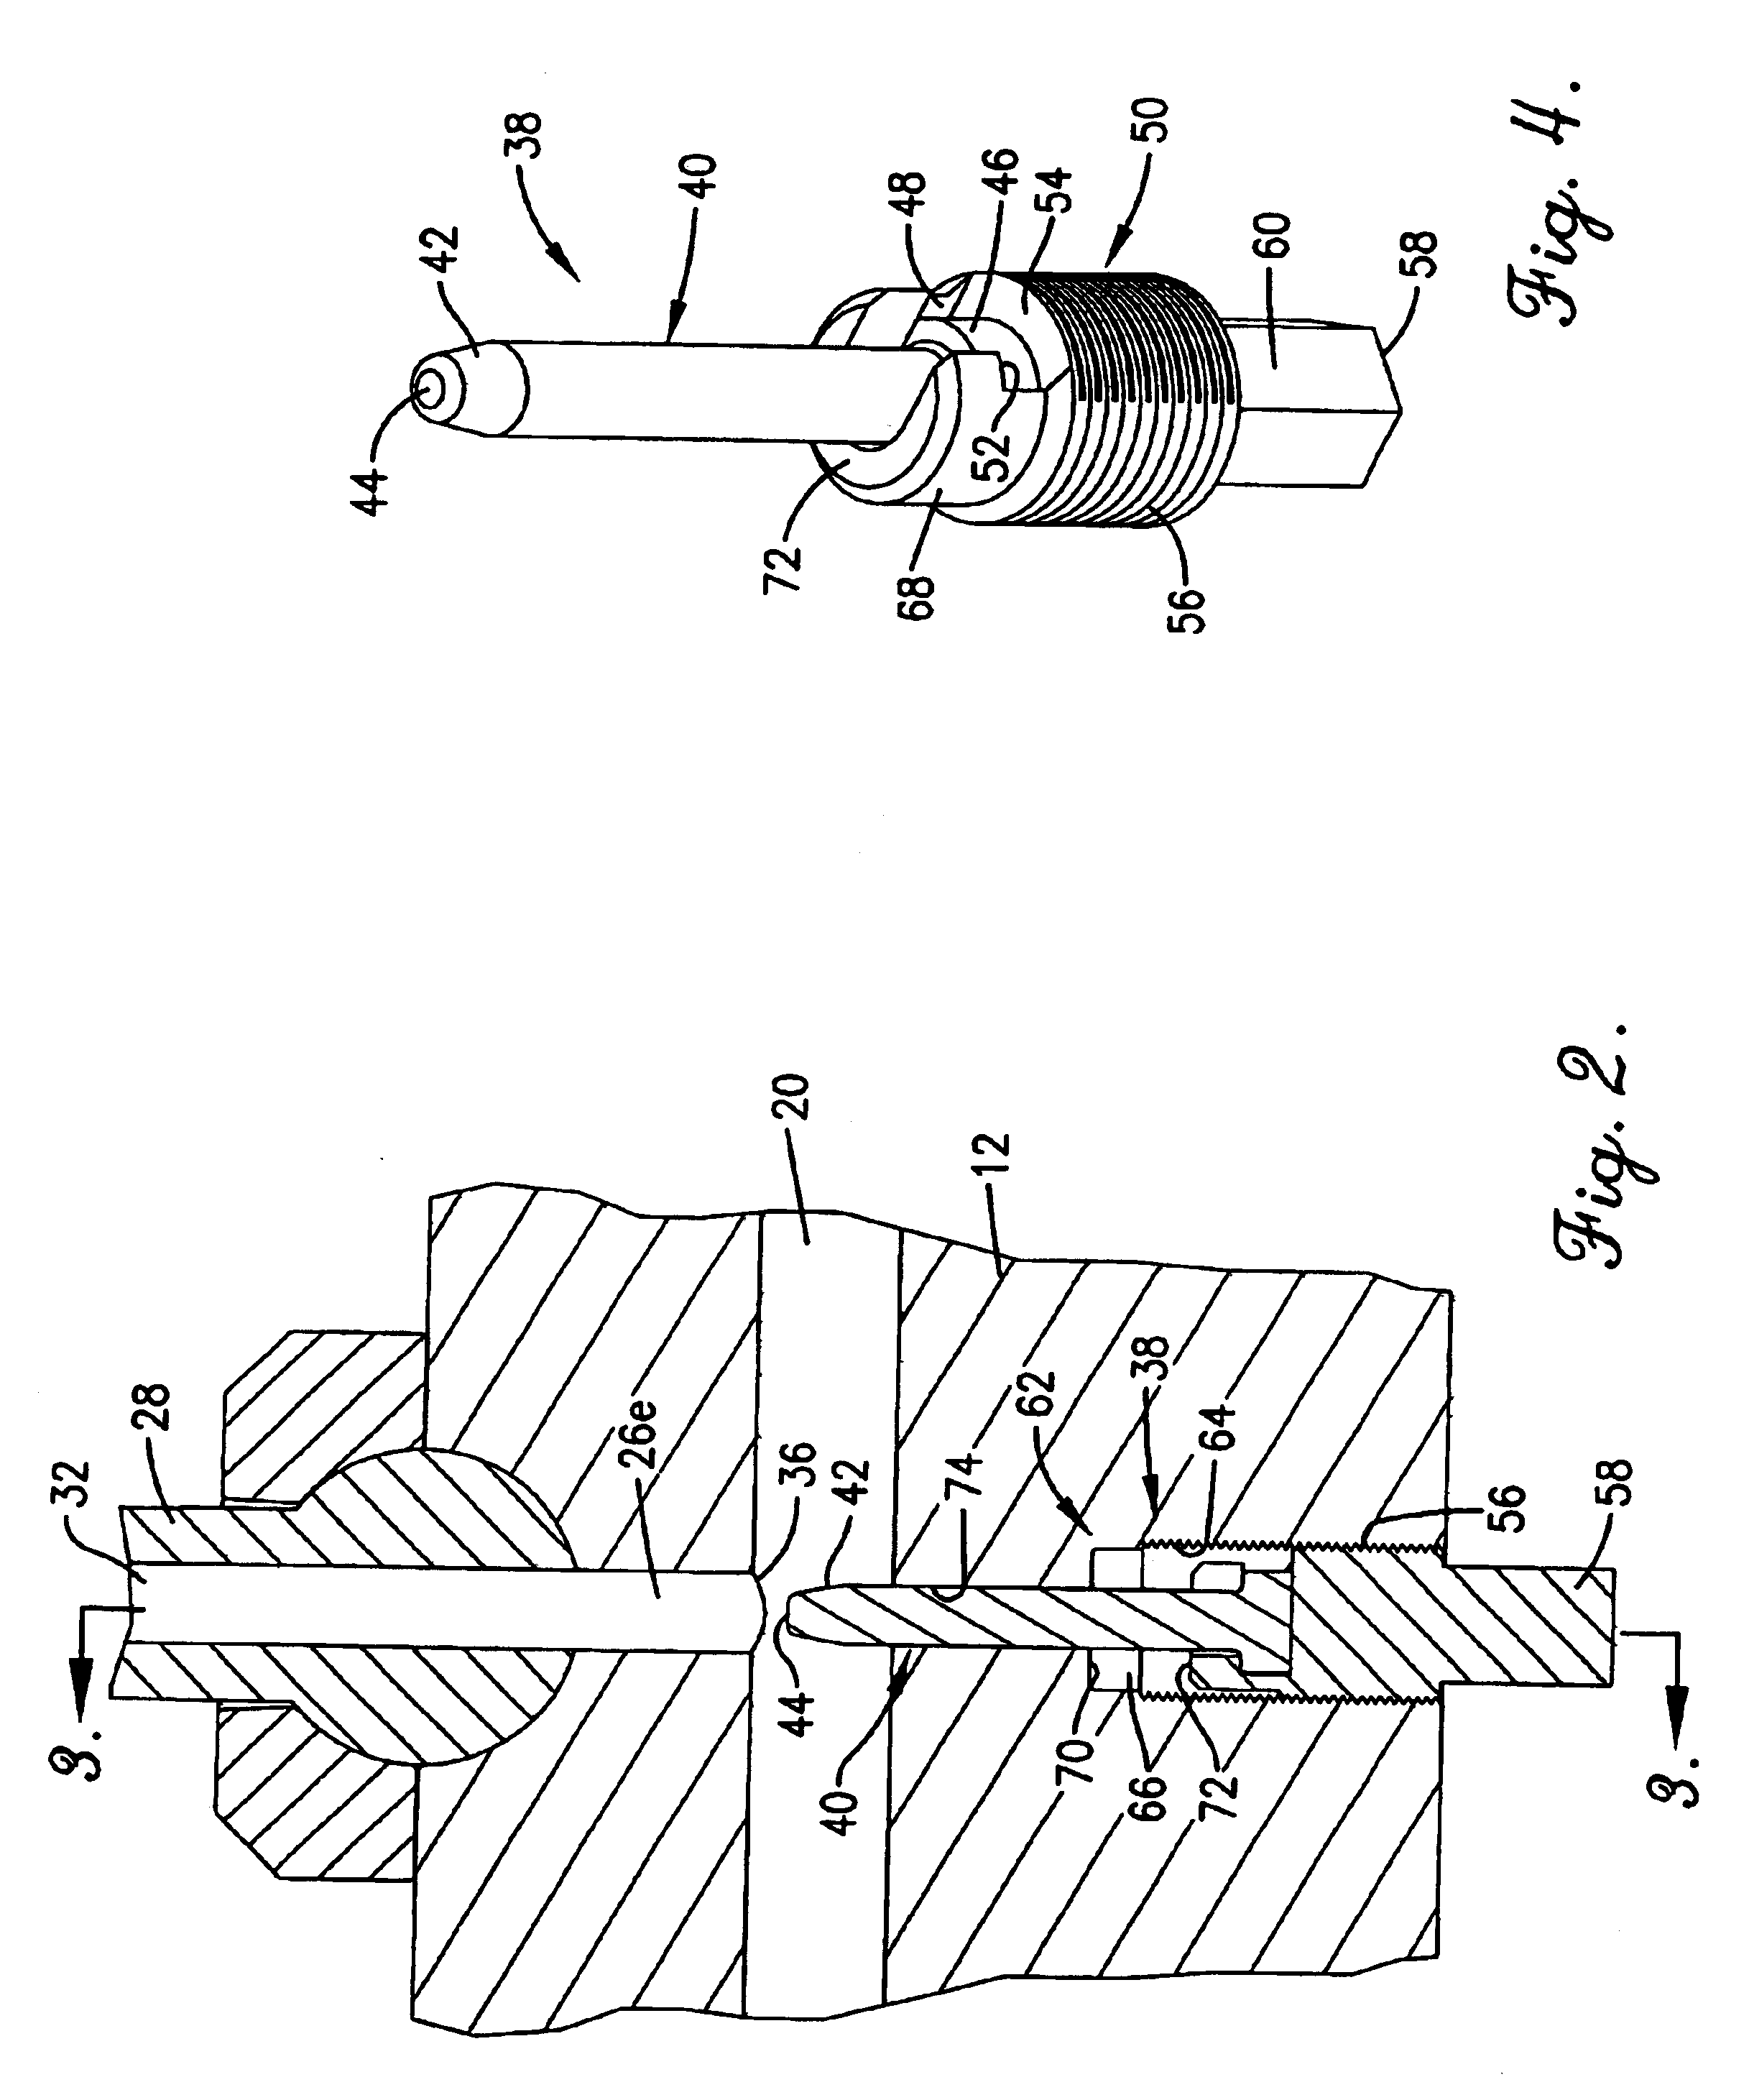 Apparatus for obtaining balanced flow of hot melt in a distribution manifold